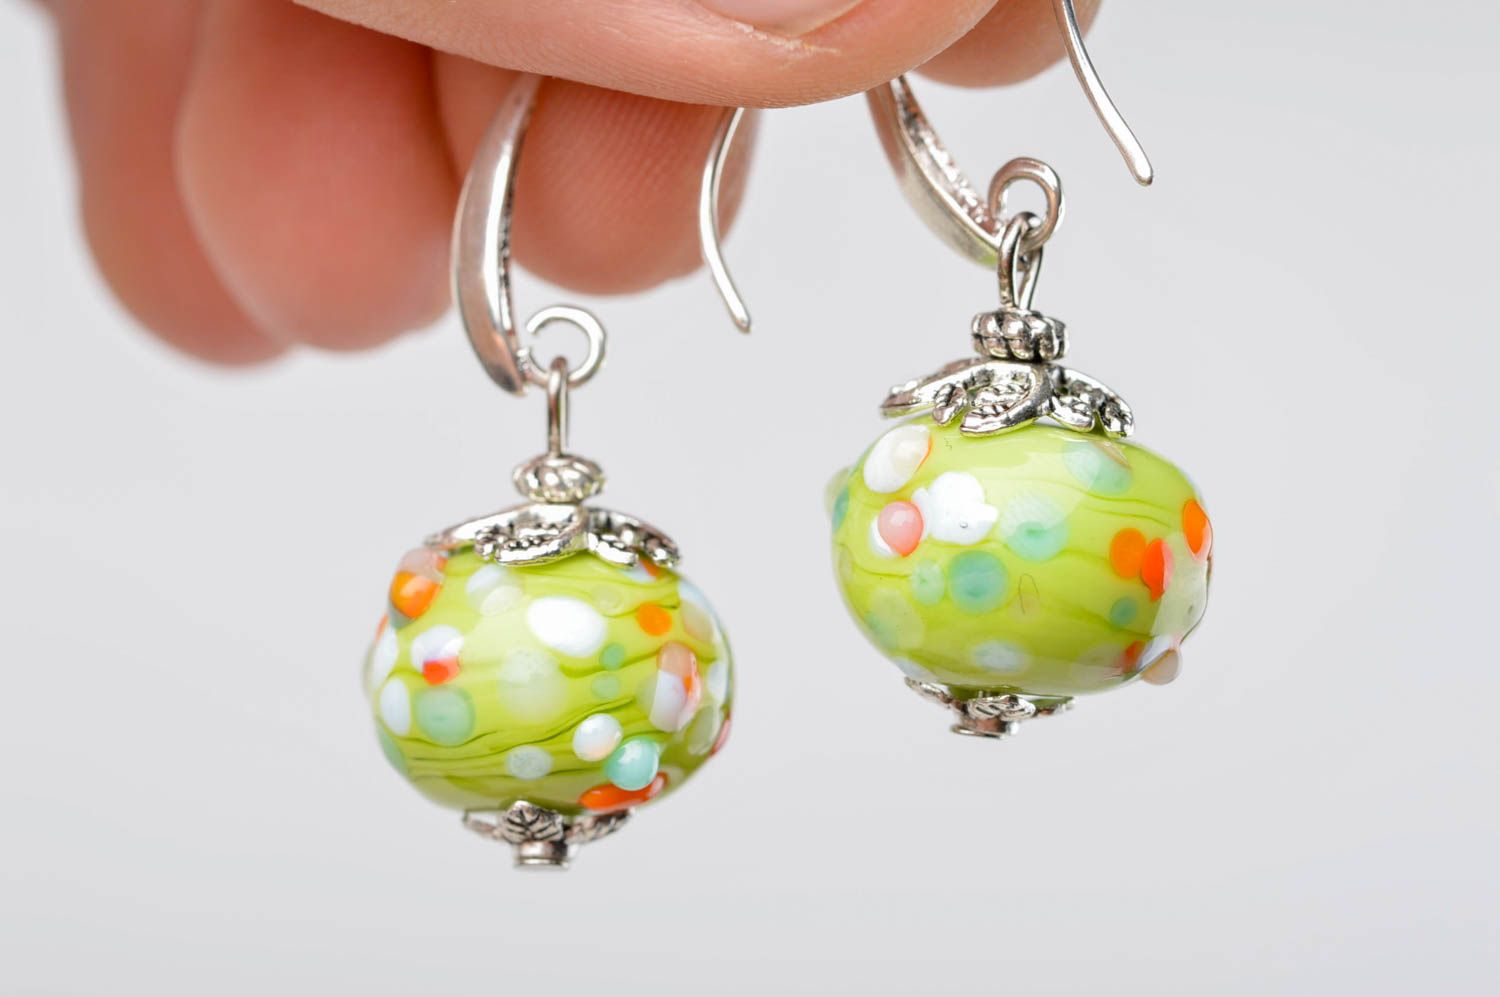 Stylish handmade glass earrings fashion trends fashion accessories for girls photo 5